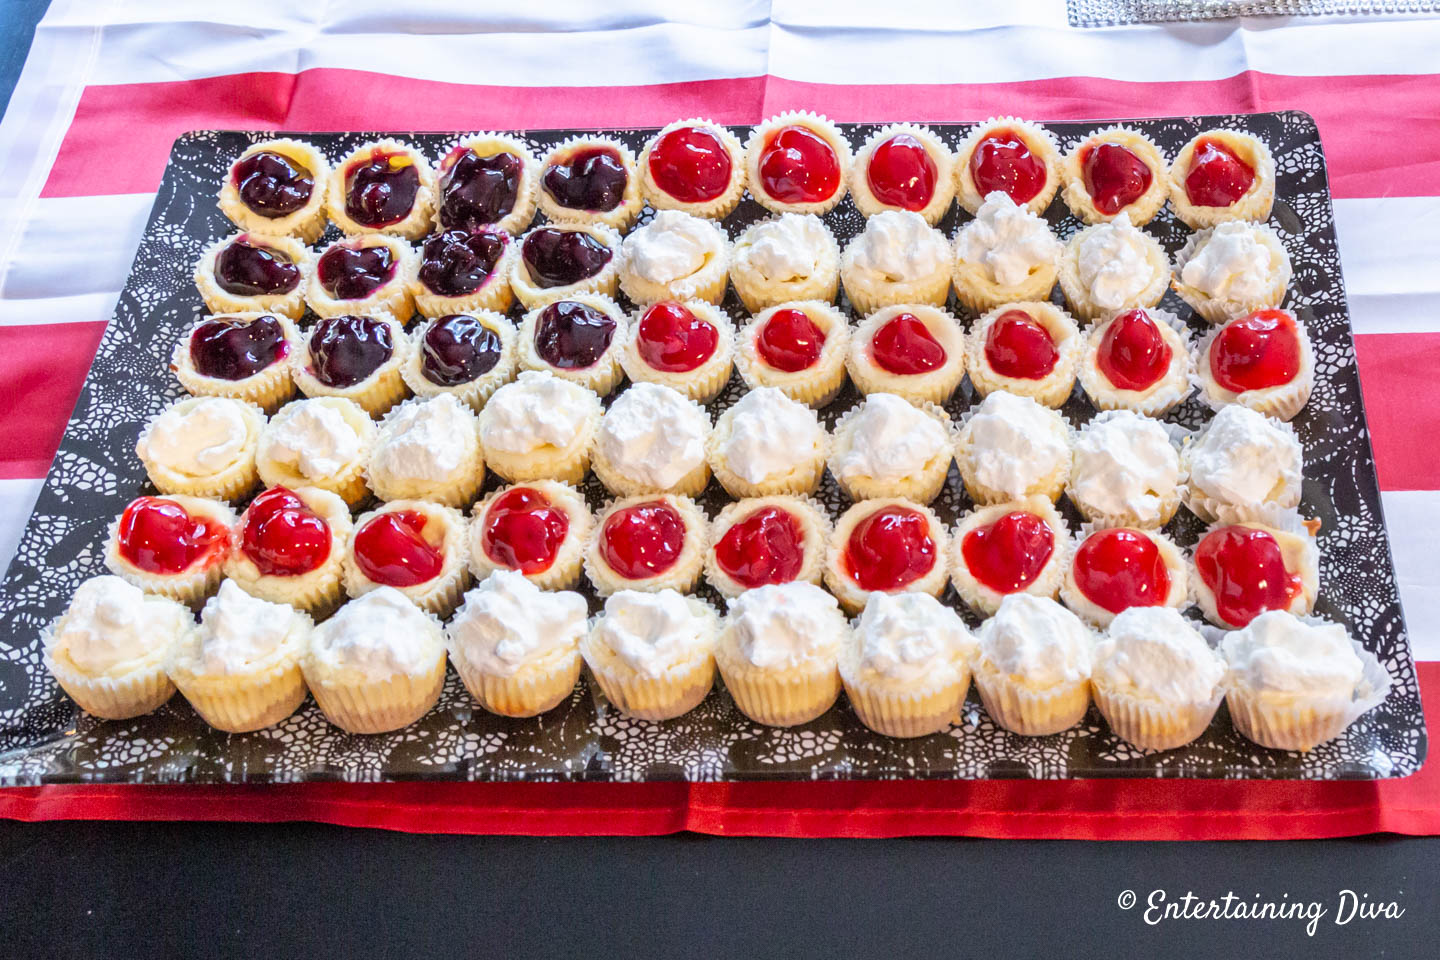 4th of July dessert in the shape of a flag made from cheesecake cupcakes with blueberry filling, cherry filling and whipped cream